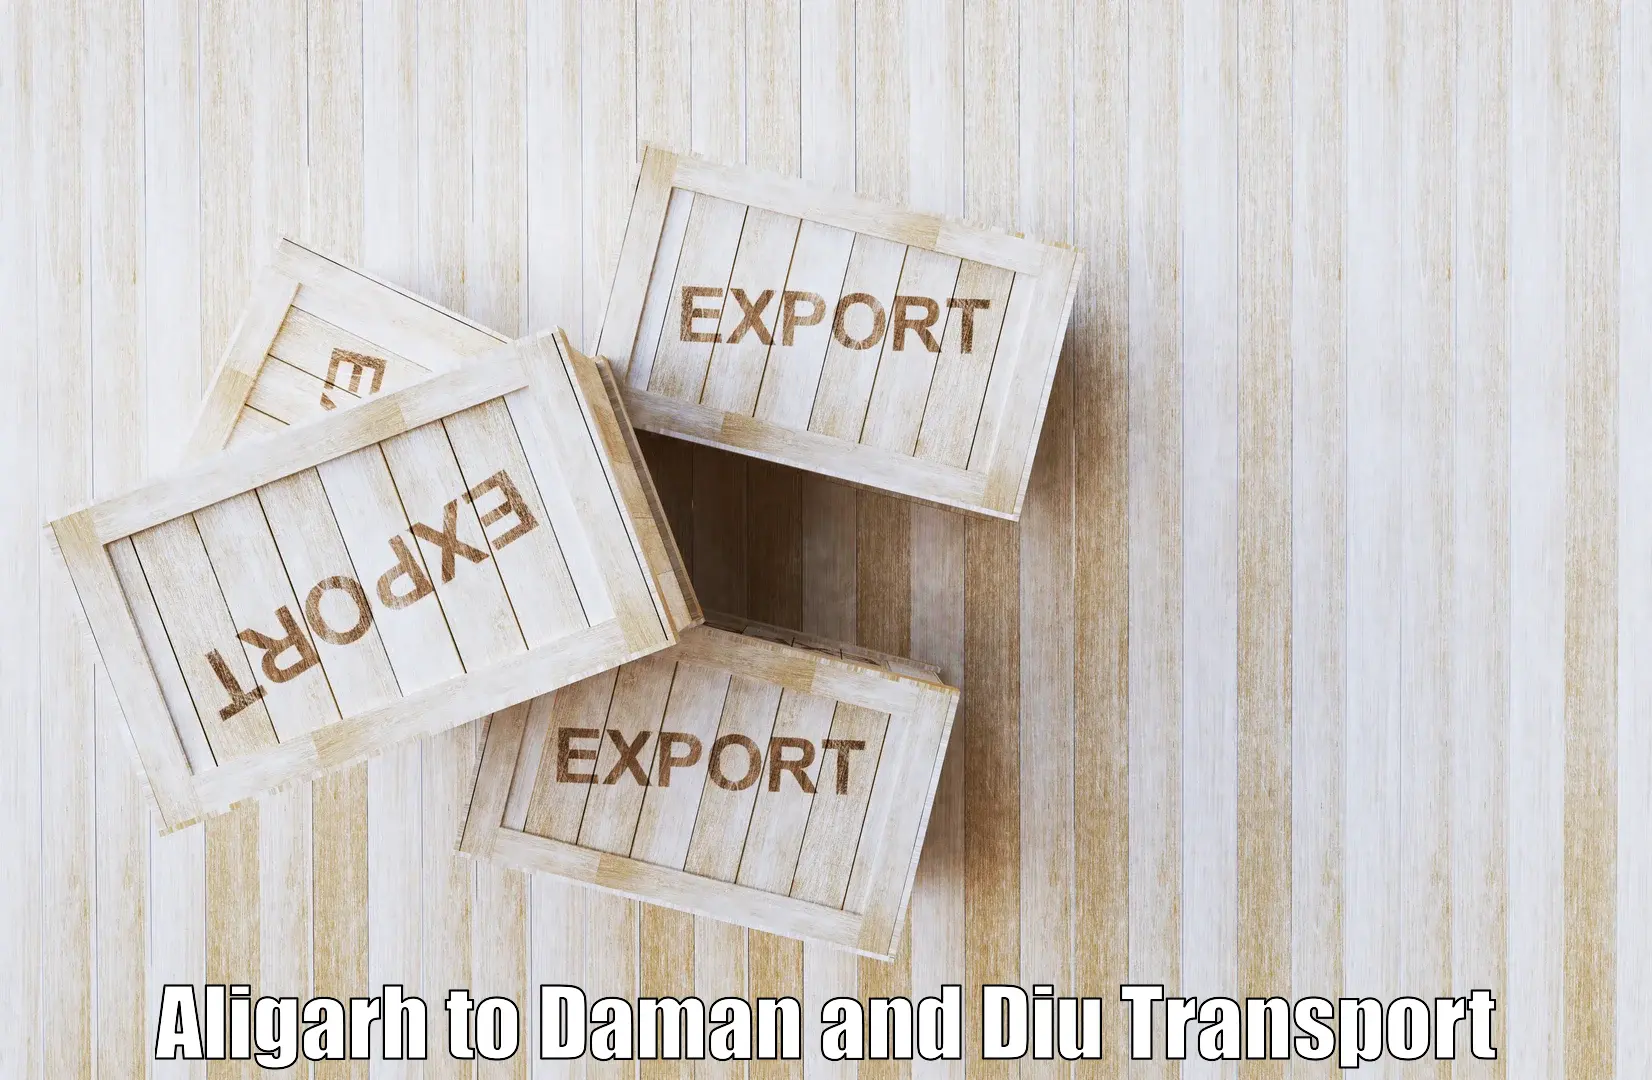 Commercial transport service Aligarh to Daman and Diu